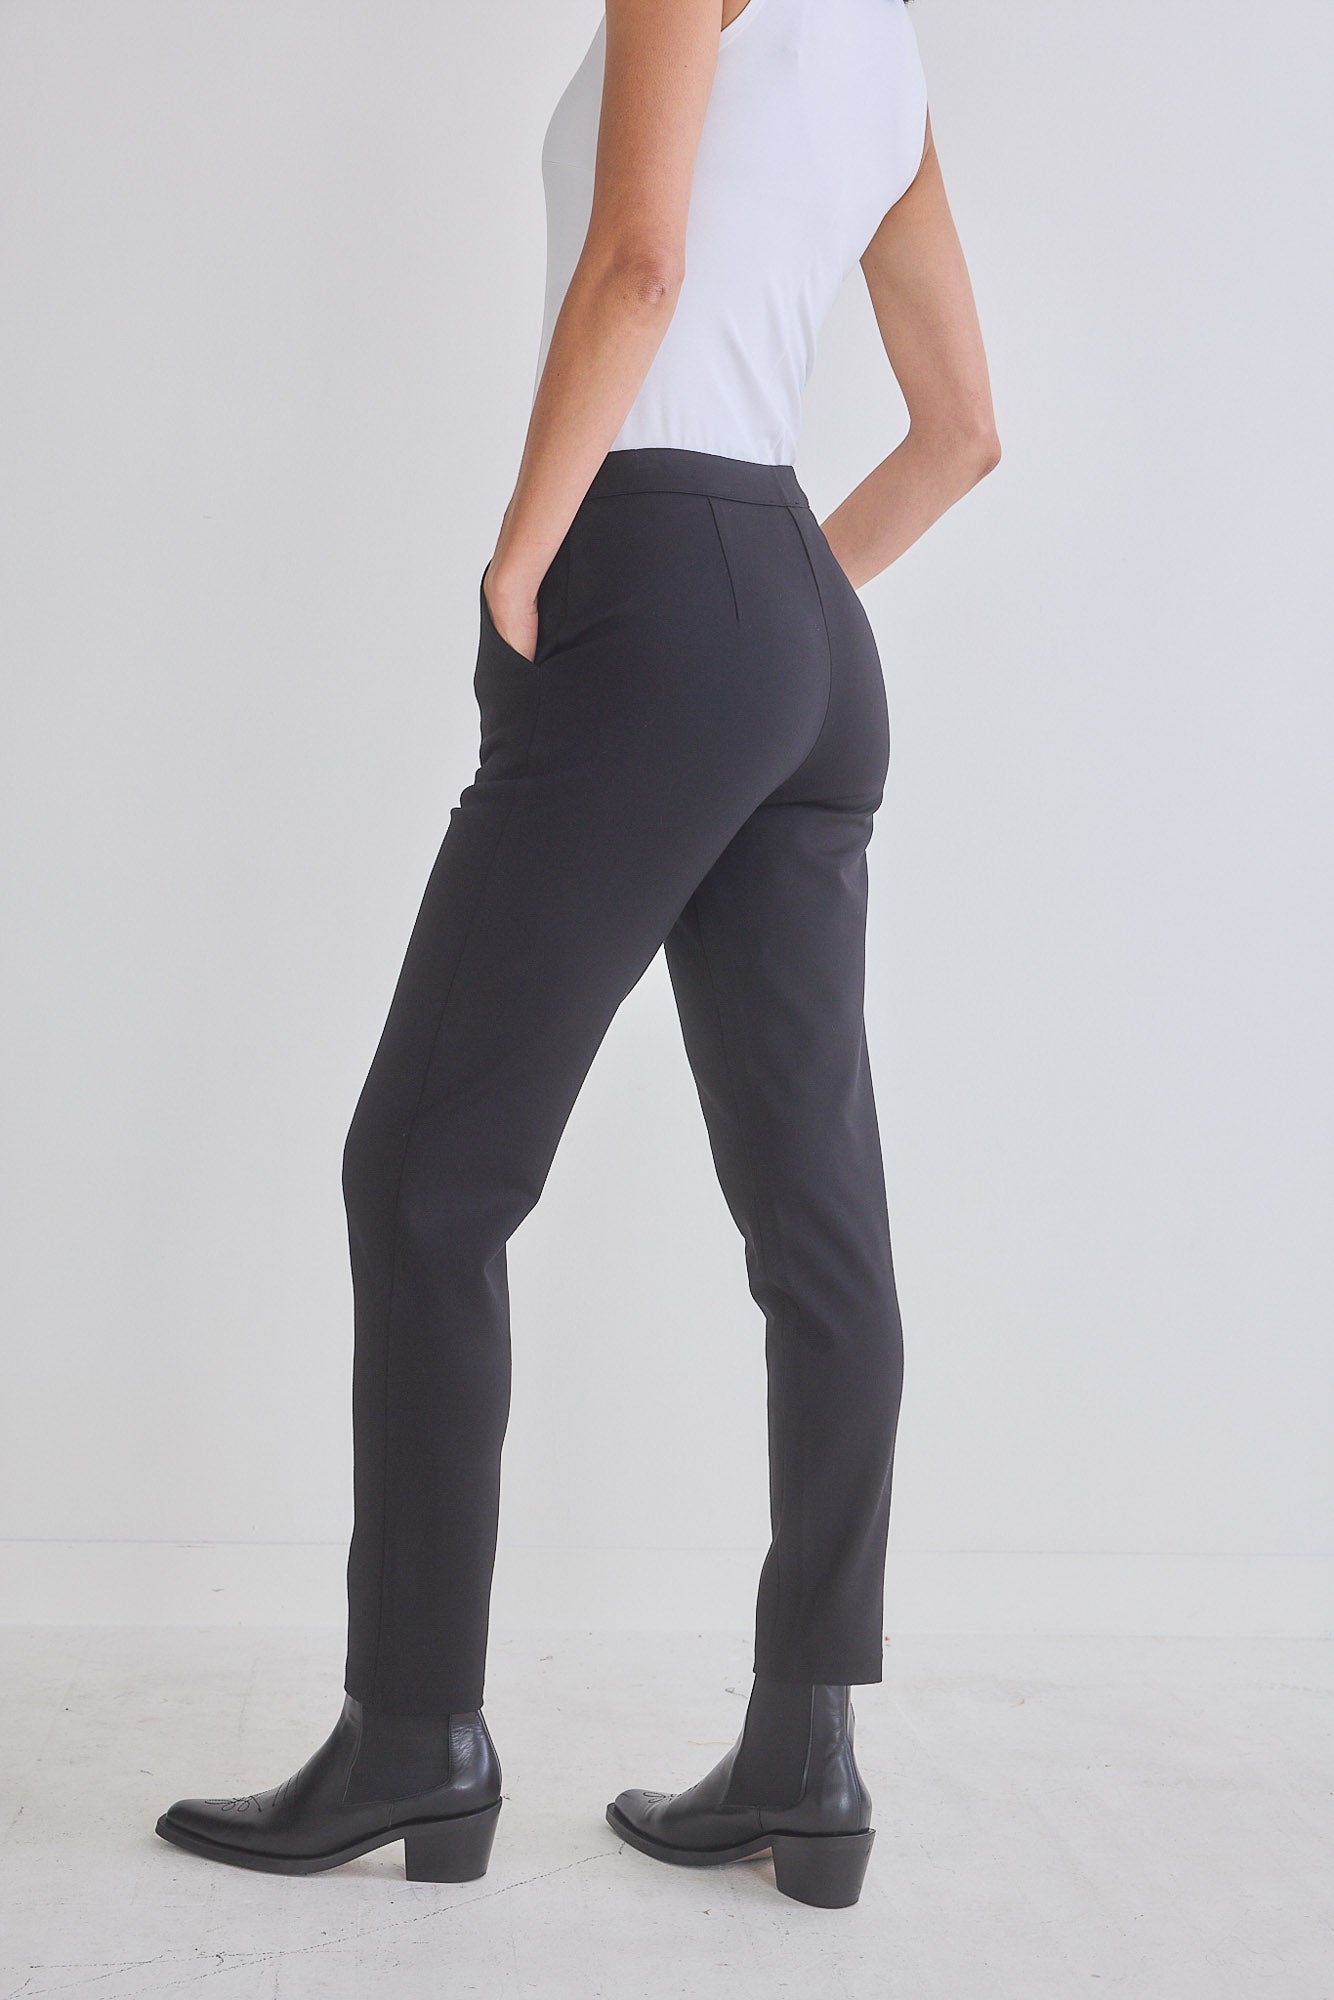 The Comfort Trouser